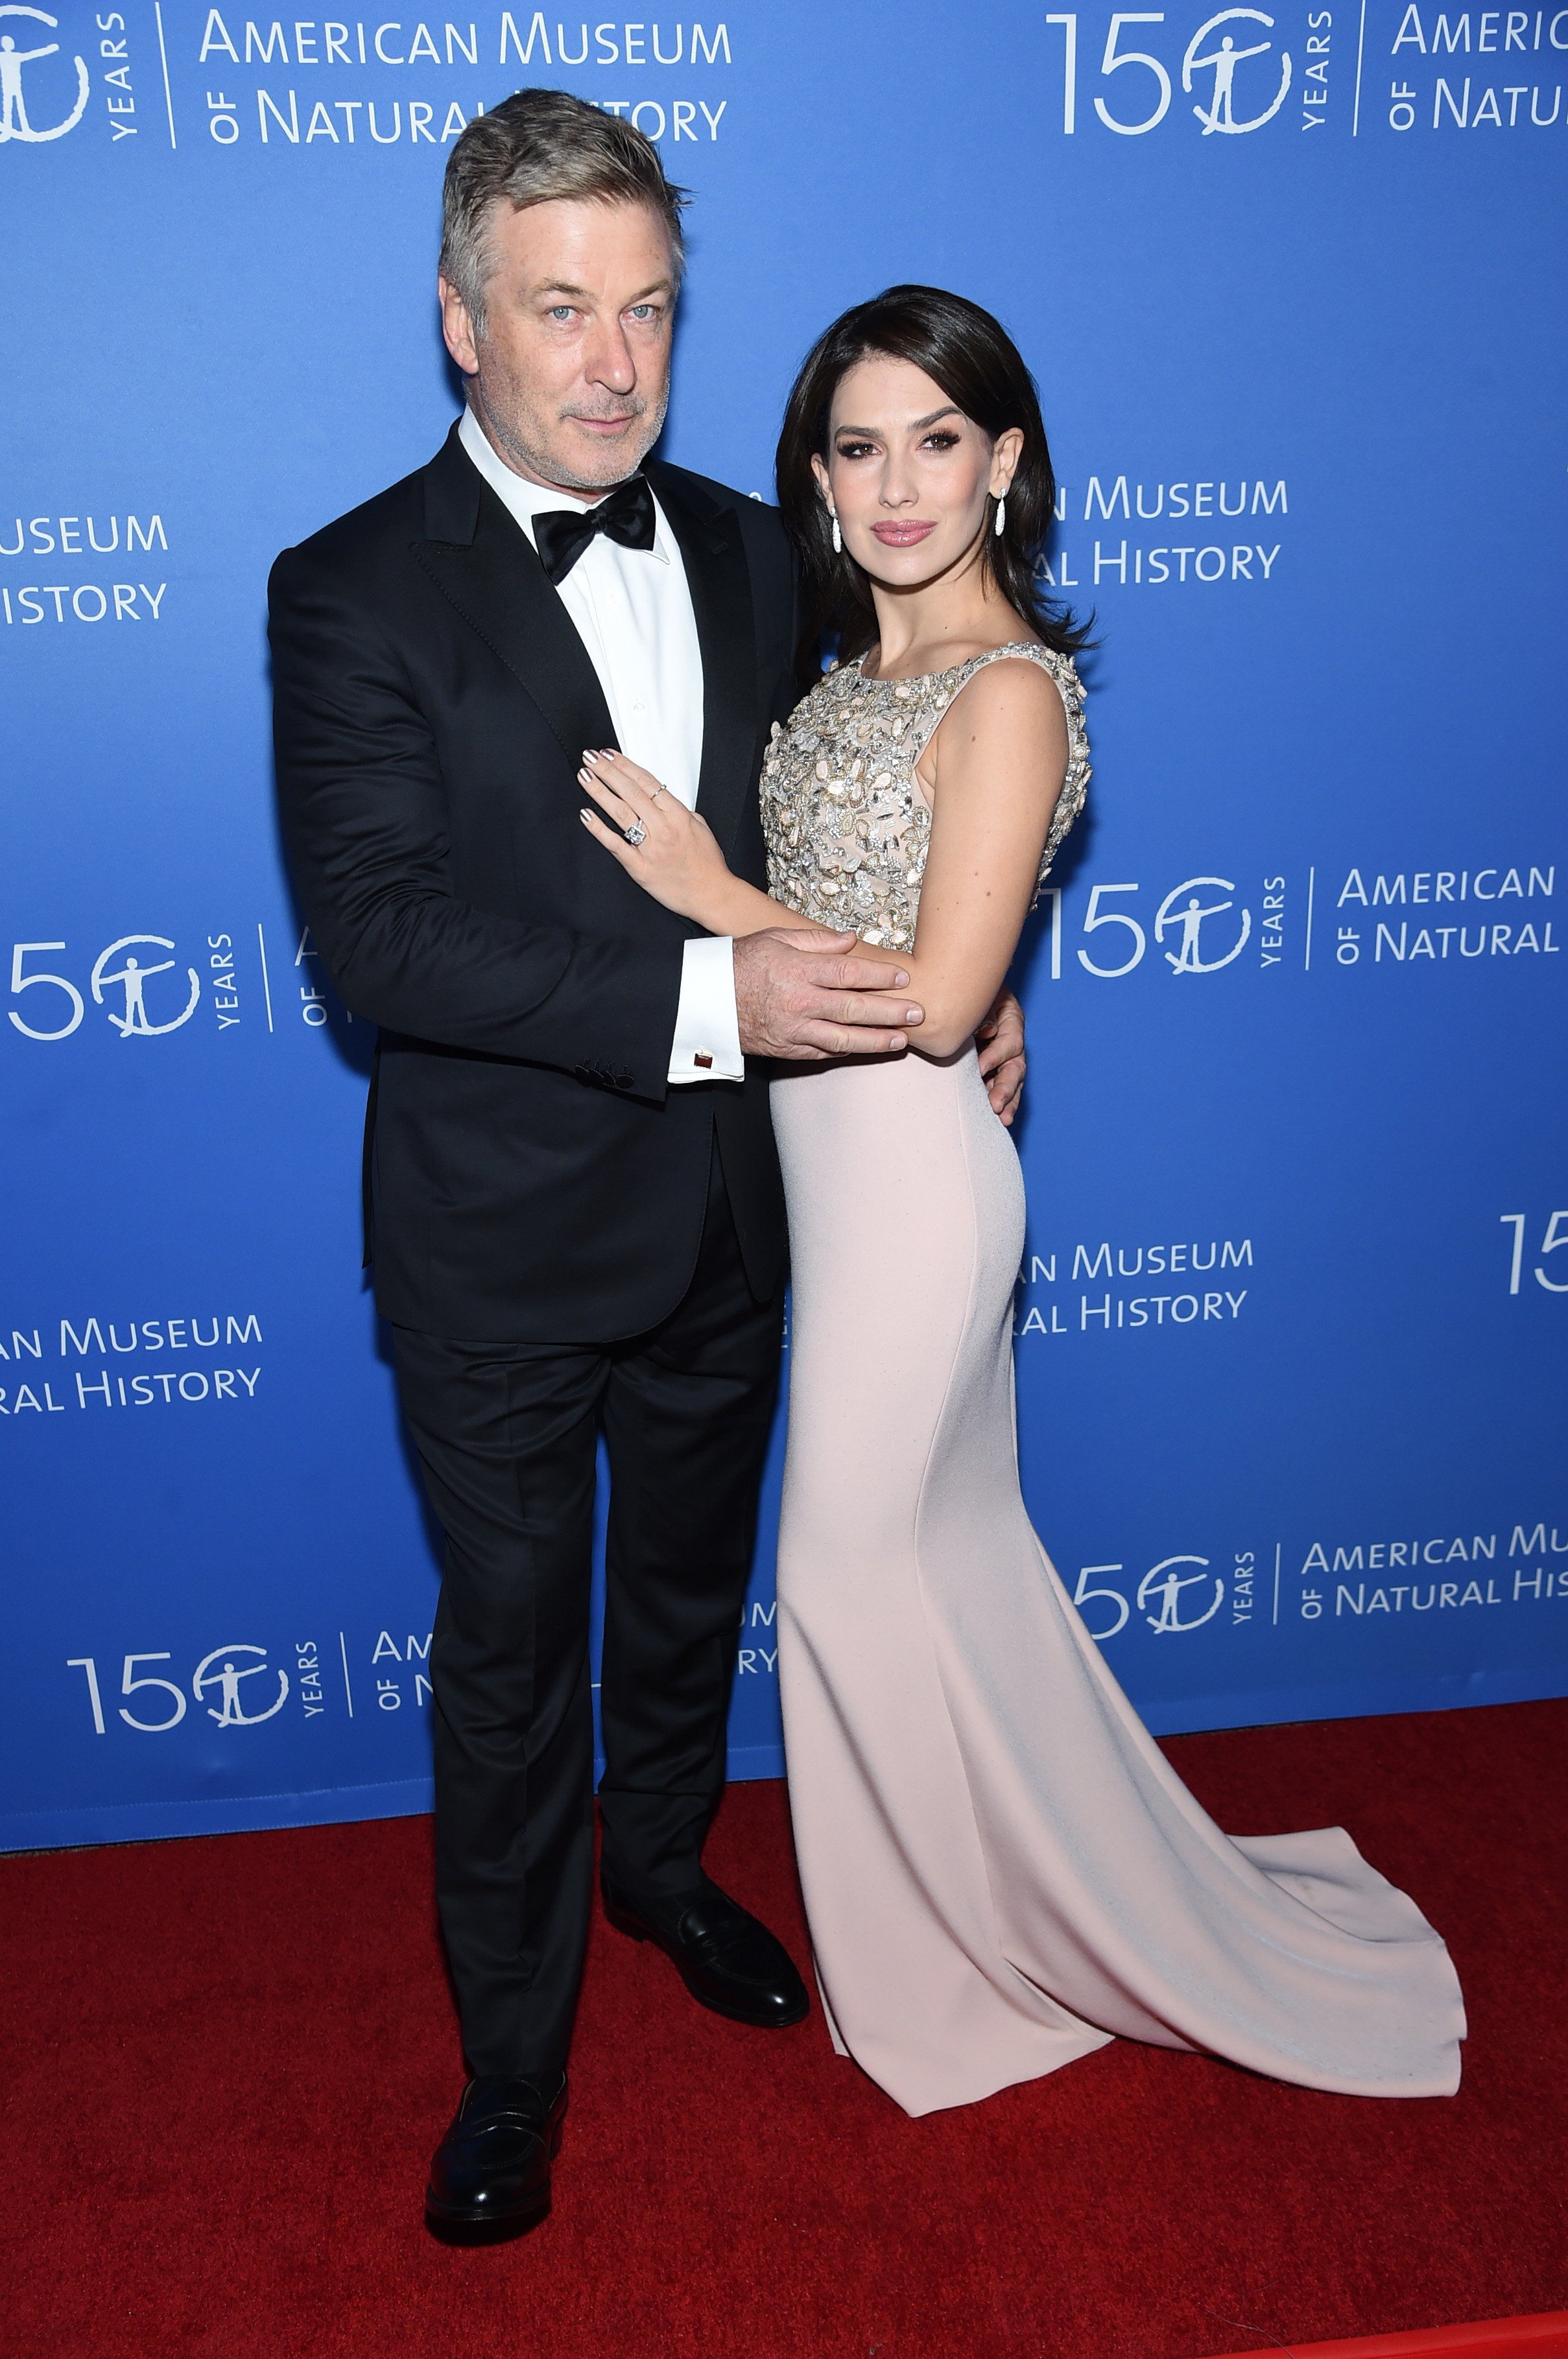 Alec Baldwin and Hilaria Baldwin attend the American Museum of Natural History Gala in New York City on November 21, 2019 | Photo: Getty Images